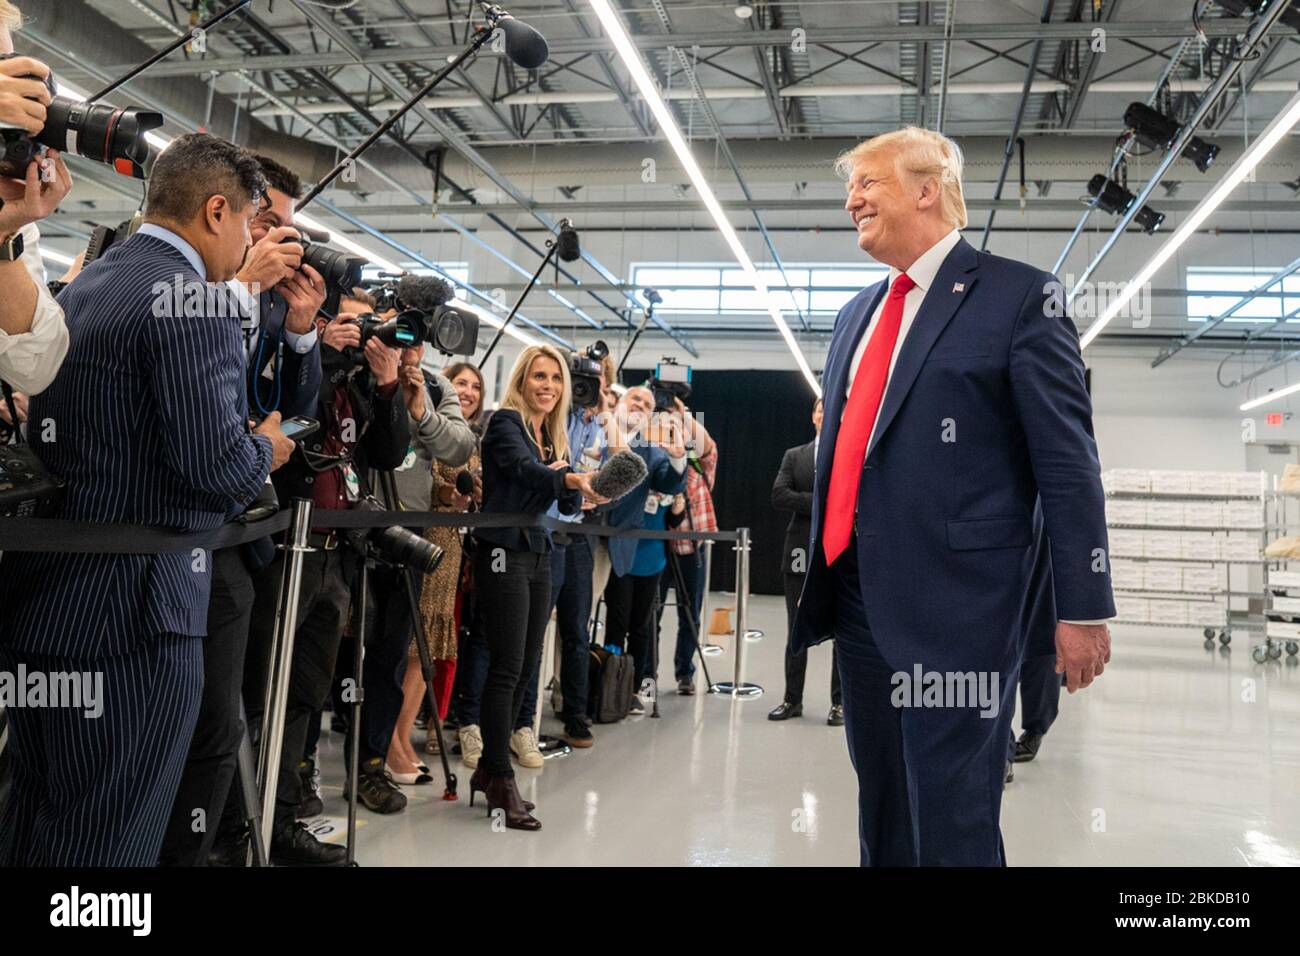 U.S President Donald Trump tours the newly opened Louis Vuitton Workshop  Rochambeau October 17, 2019 in Alvarado, Texas. Joining the president from  left to right are: Carlos Sousa, the general manager of